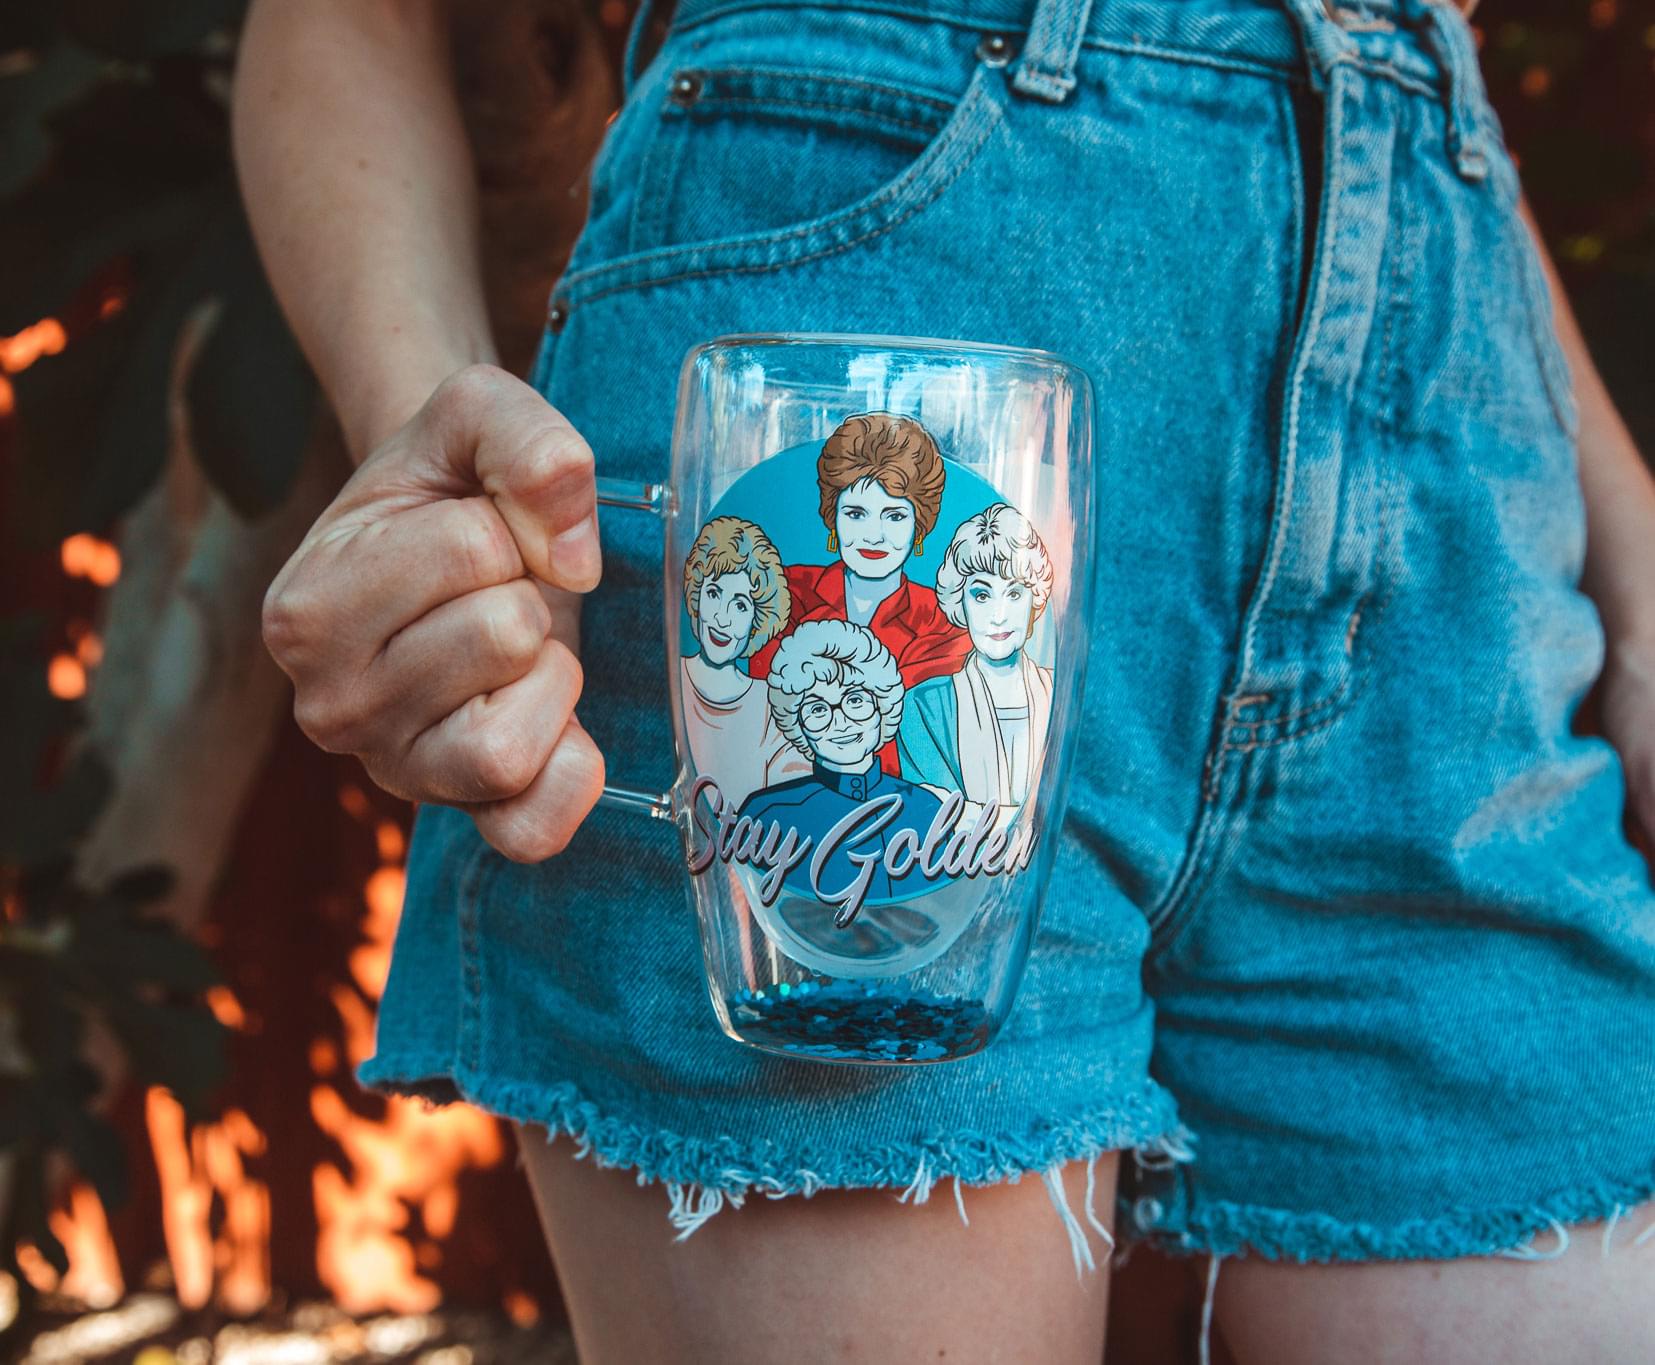 The Golden Girls "Stay Golden" Double-Walled Glass Mug | Holds 15 Ounces